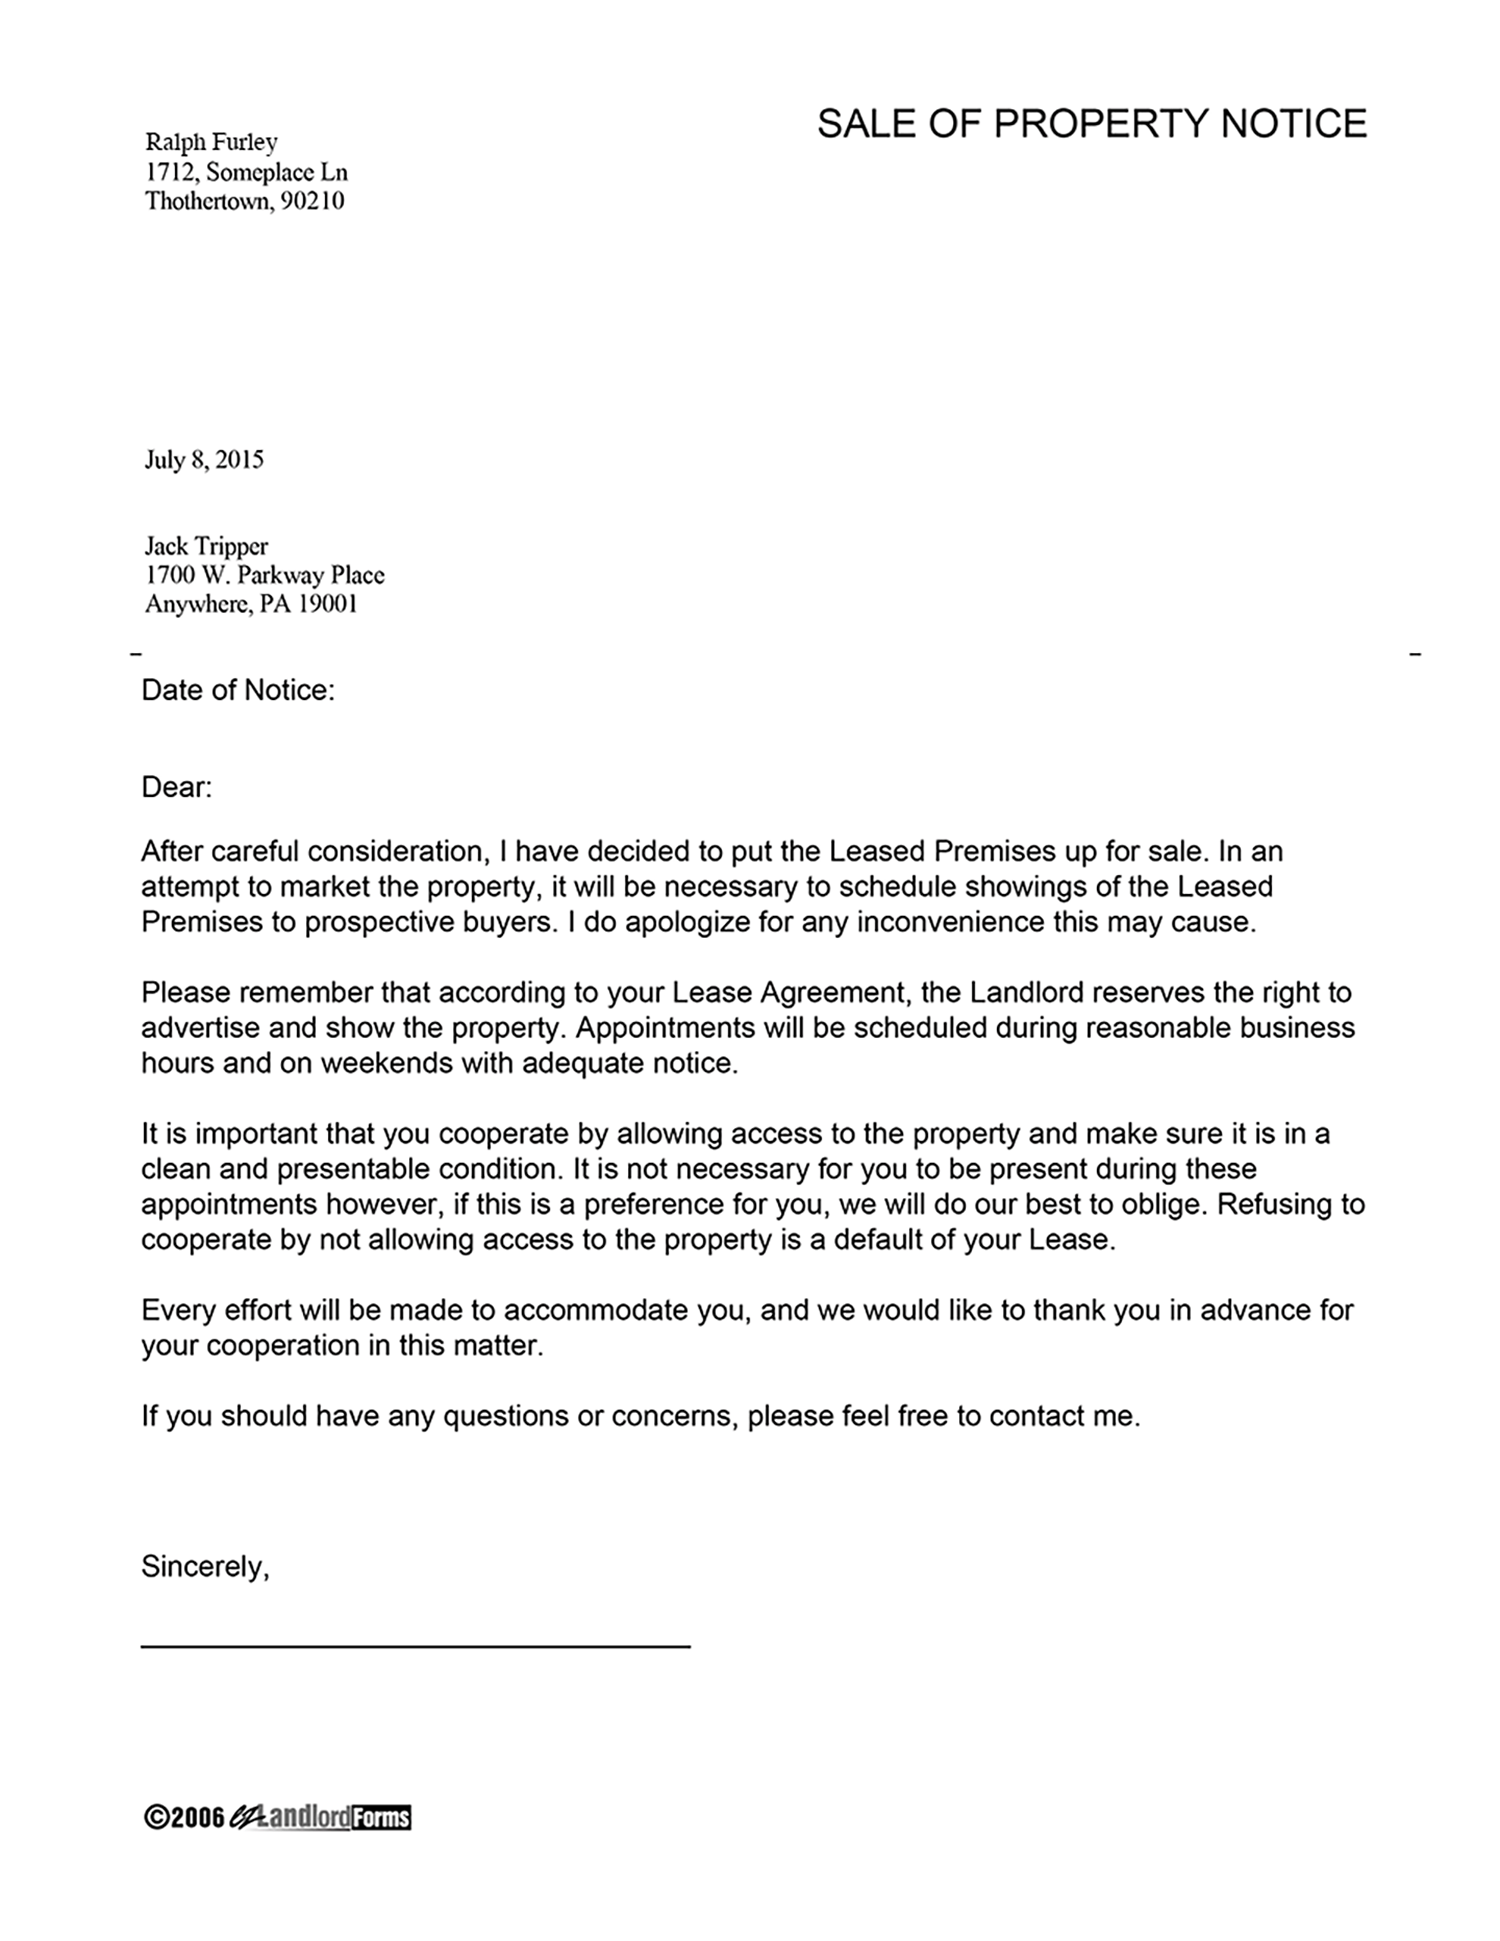 Landlord Letter To Tenant To Vacate from www.ezlandlordforms.com